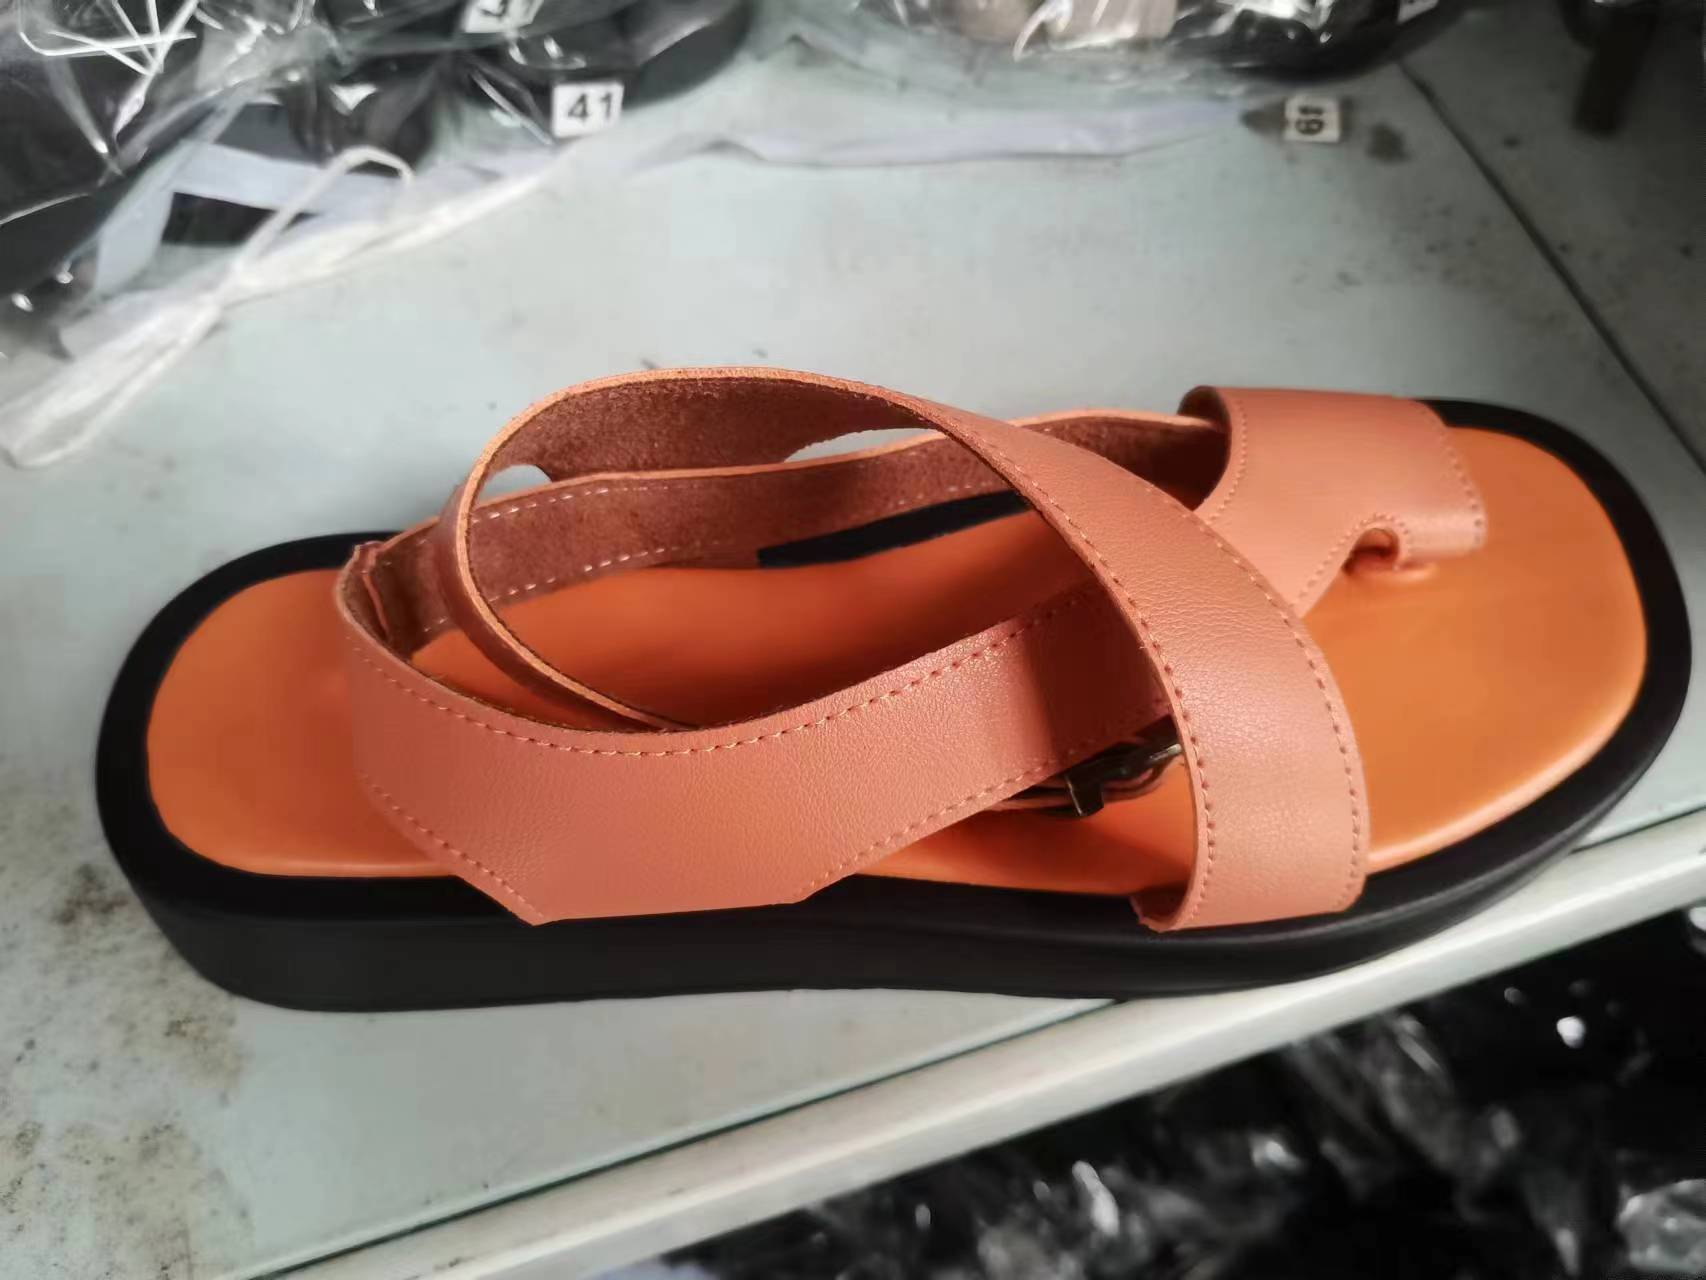 Casual Thick-Soled Clip Toe Sandals Summer Fashion Round Toe Beach Shoes With Back Buckle Strap Sandal For Women